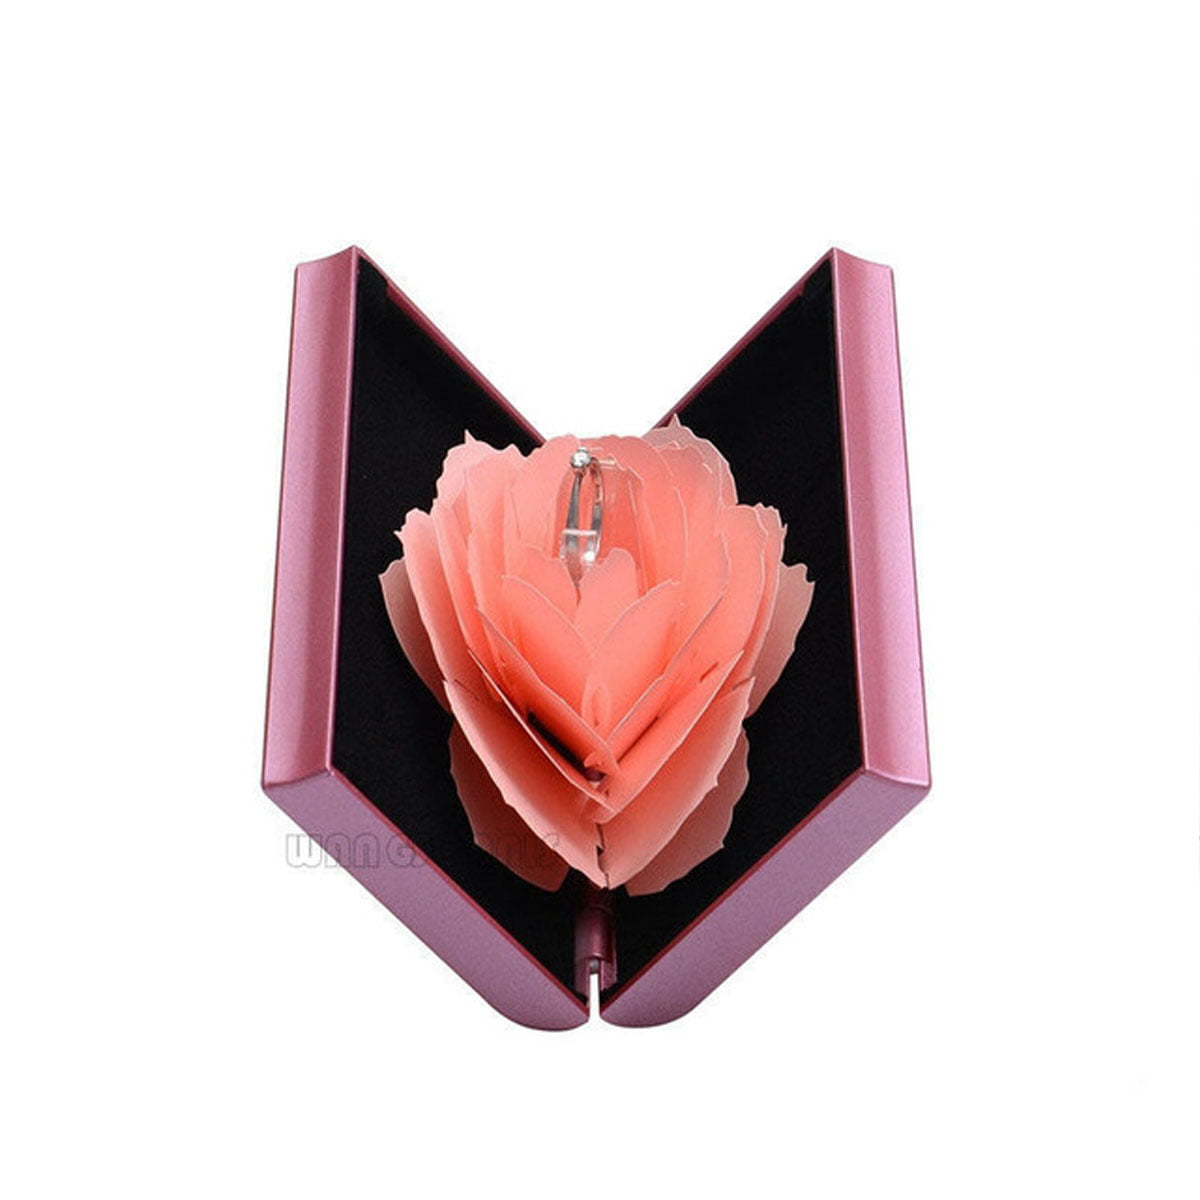 Details about   3D Pop Up Rose Ring Storage Box Wedding Engagement Jewelry Holder Case Bump Case 